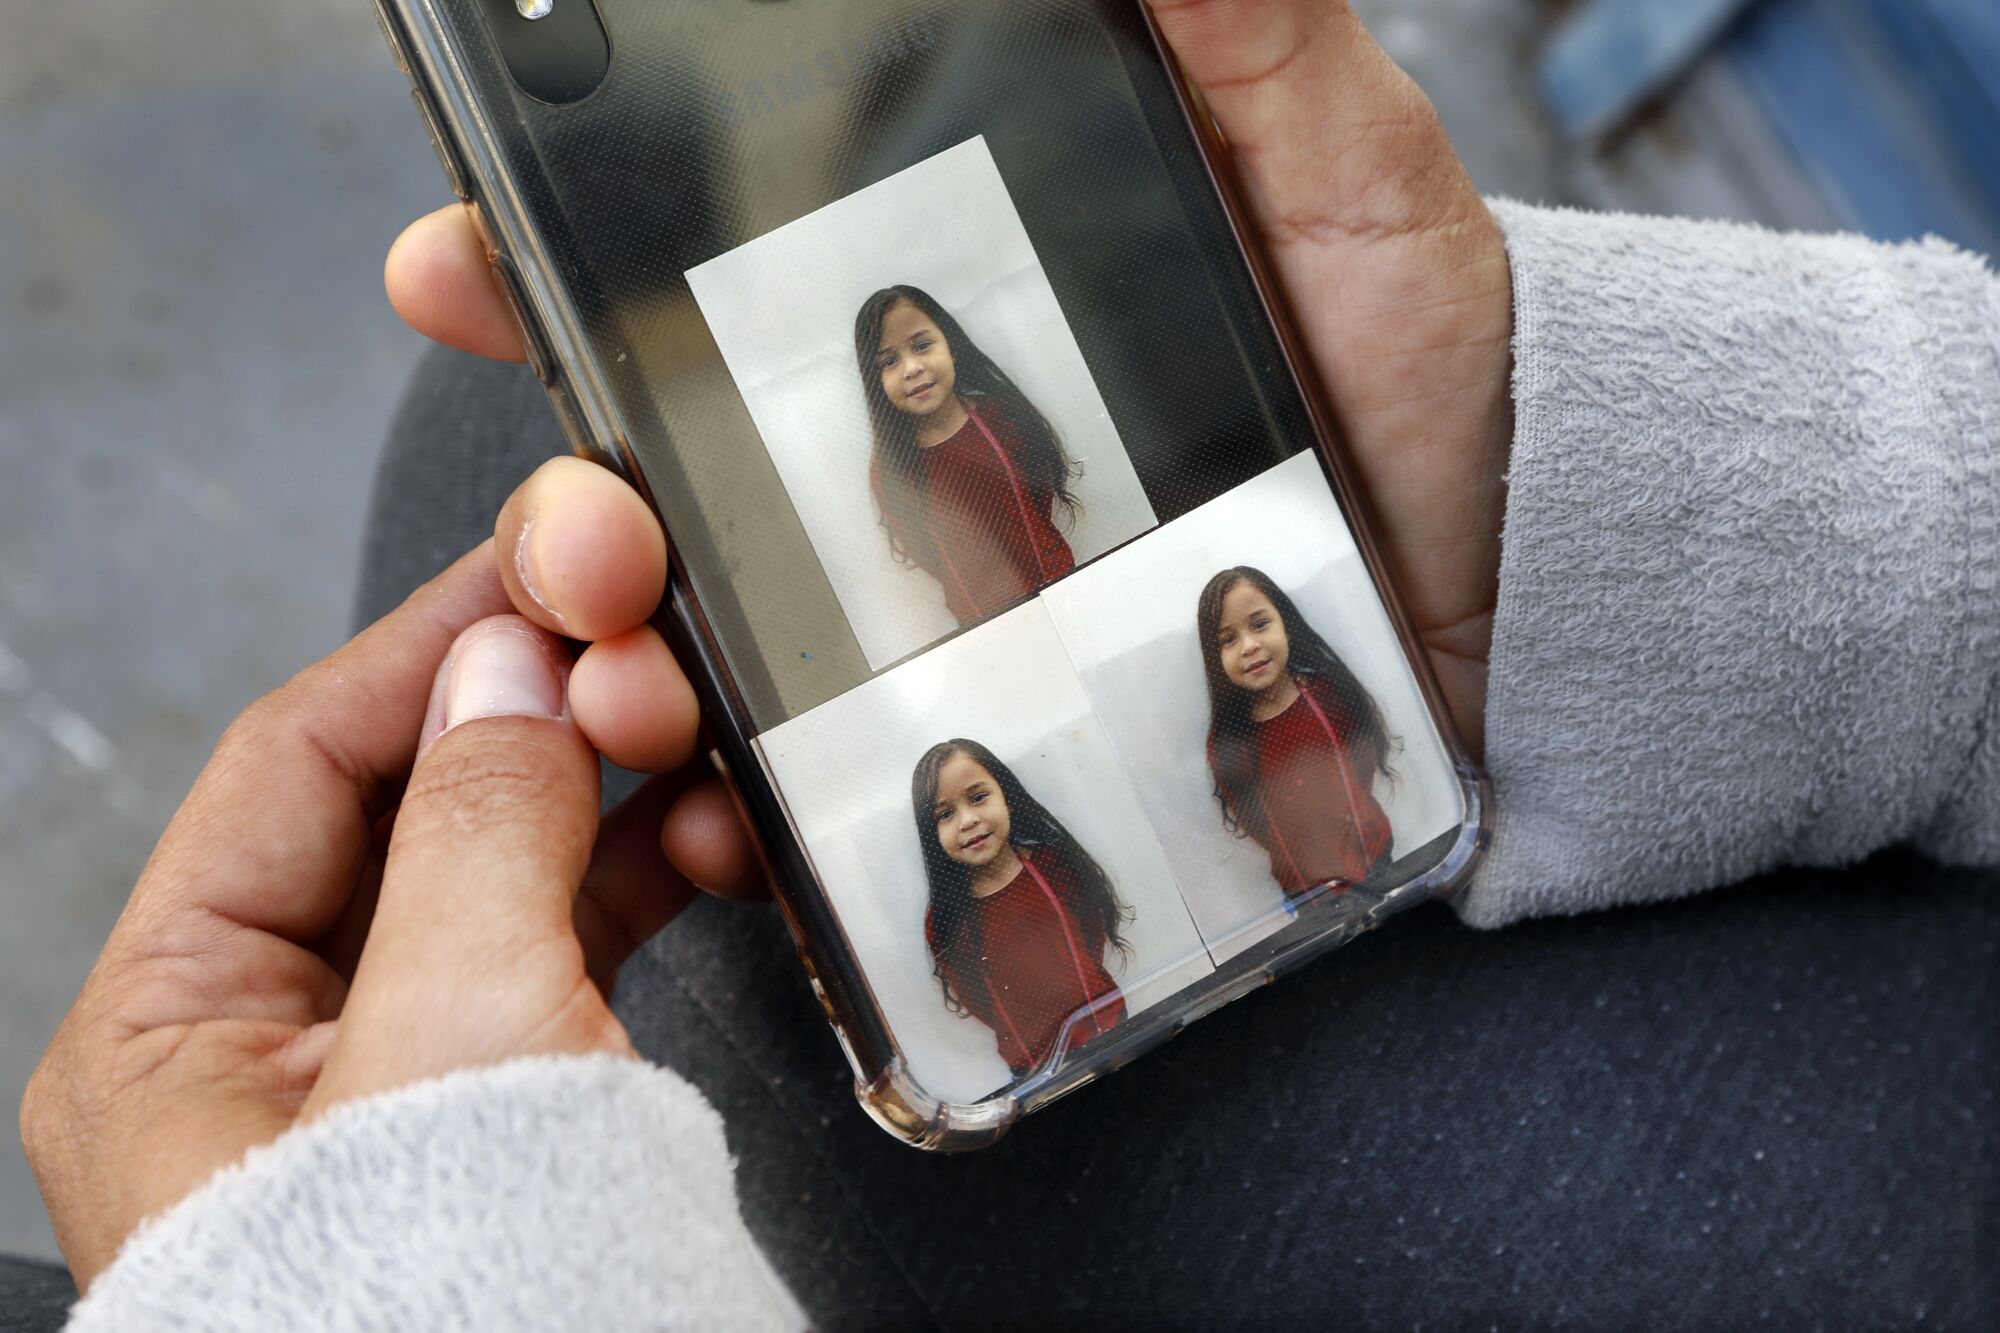 Pictures of a young girl on a phone. 